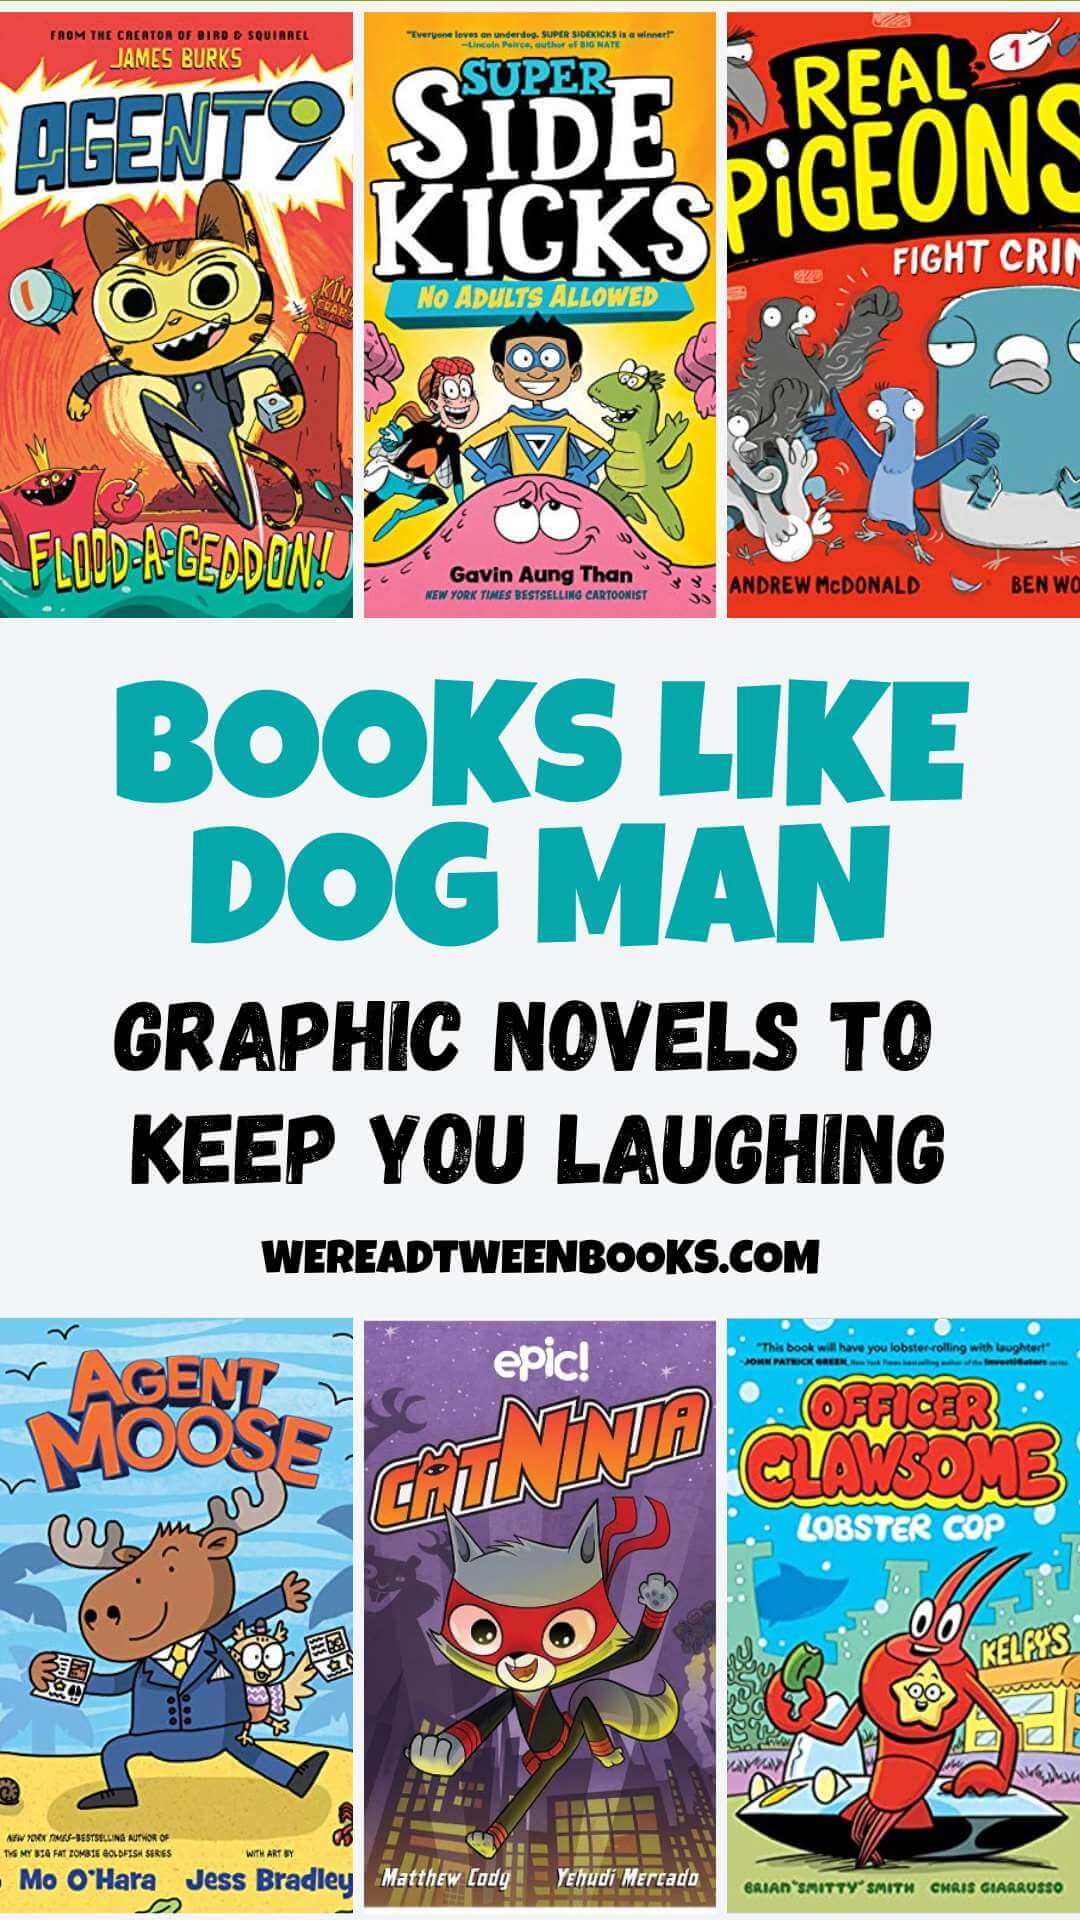 Check out this epic list of books like Dog Man from We Read Tween Books if you love graphic novels similar to the Dog Man series.